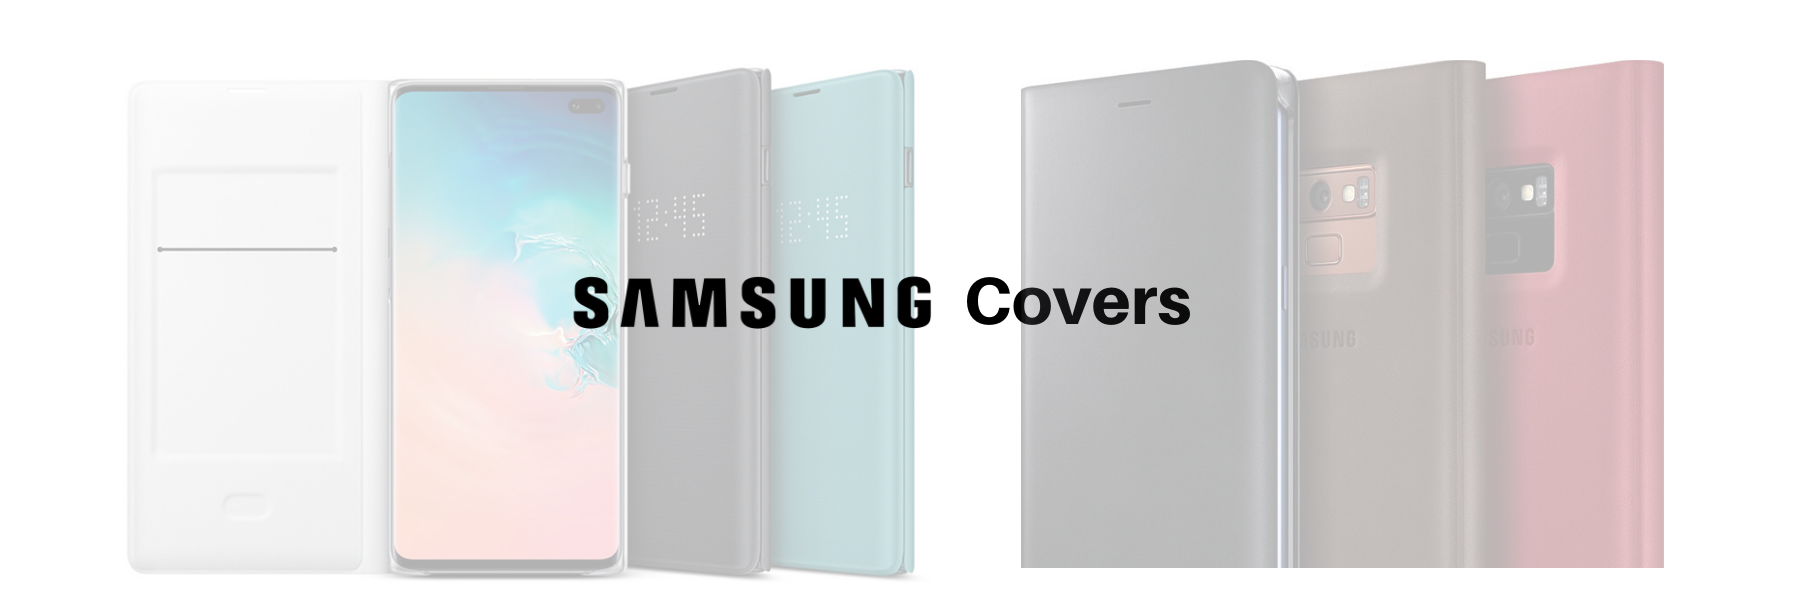 Samsung Covers